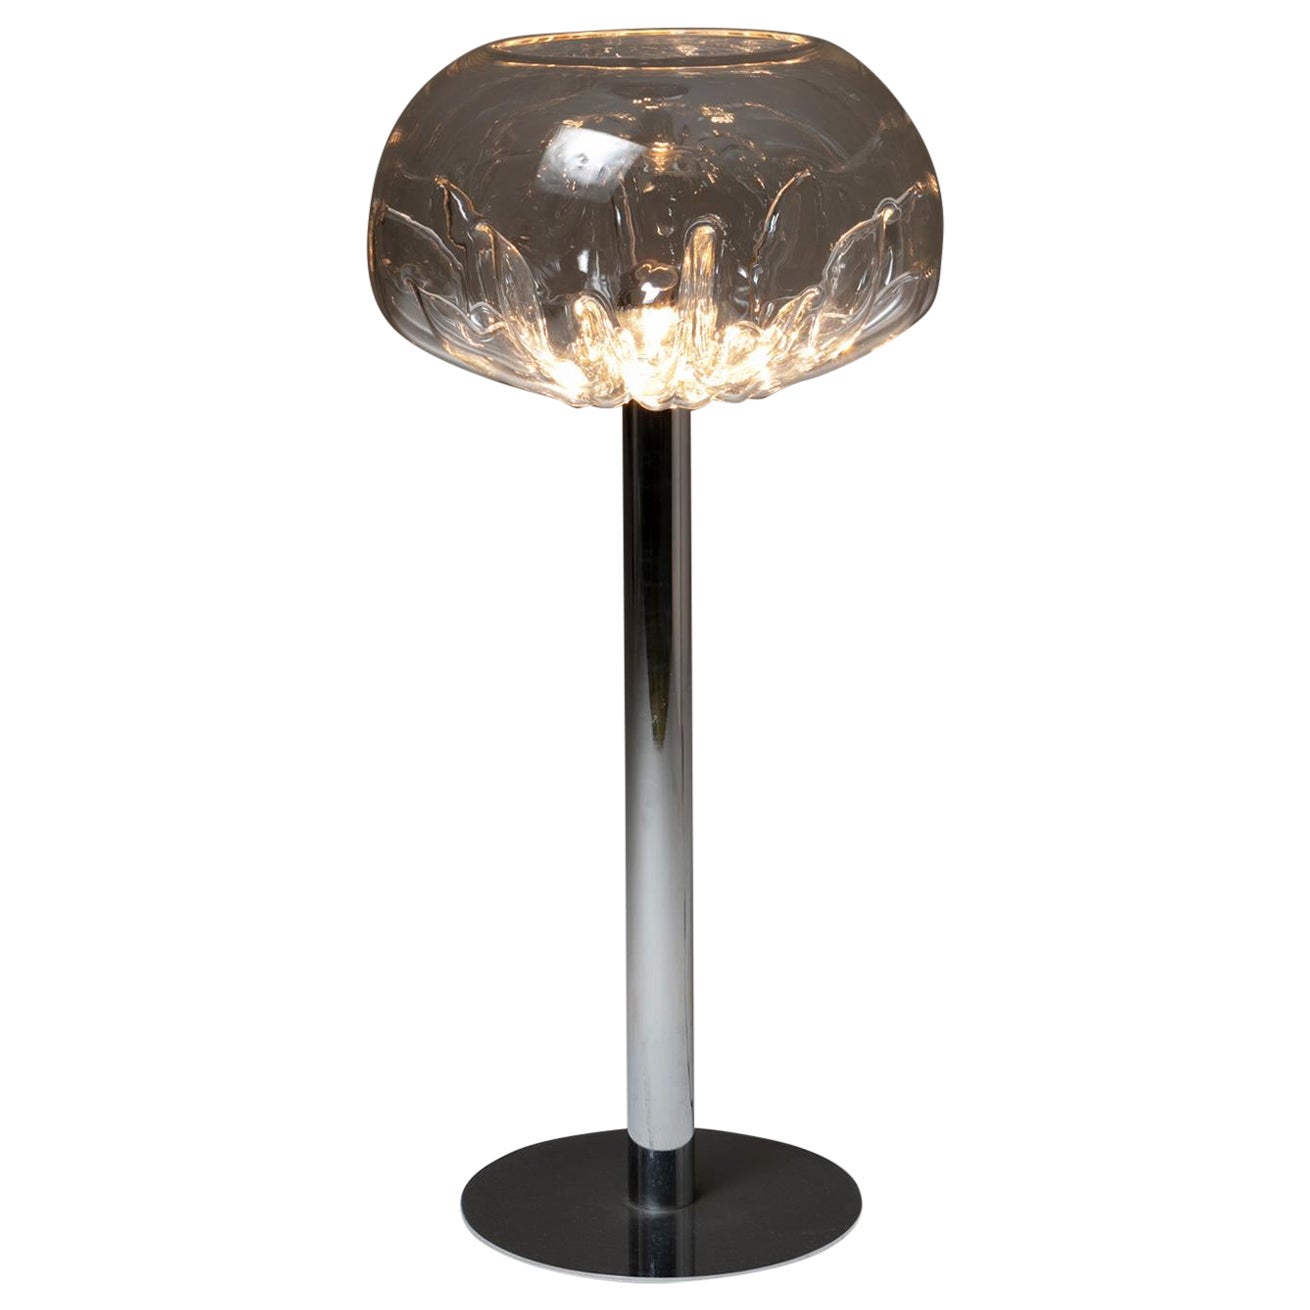 Rare "Zinia" Floor Lamp by Toni Zuccheri for VeArt, Italy, 1970s